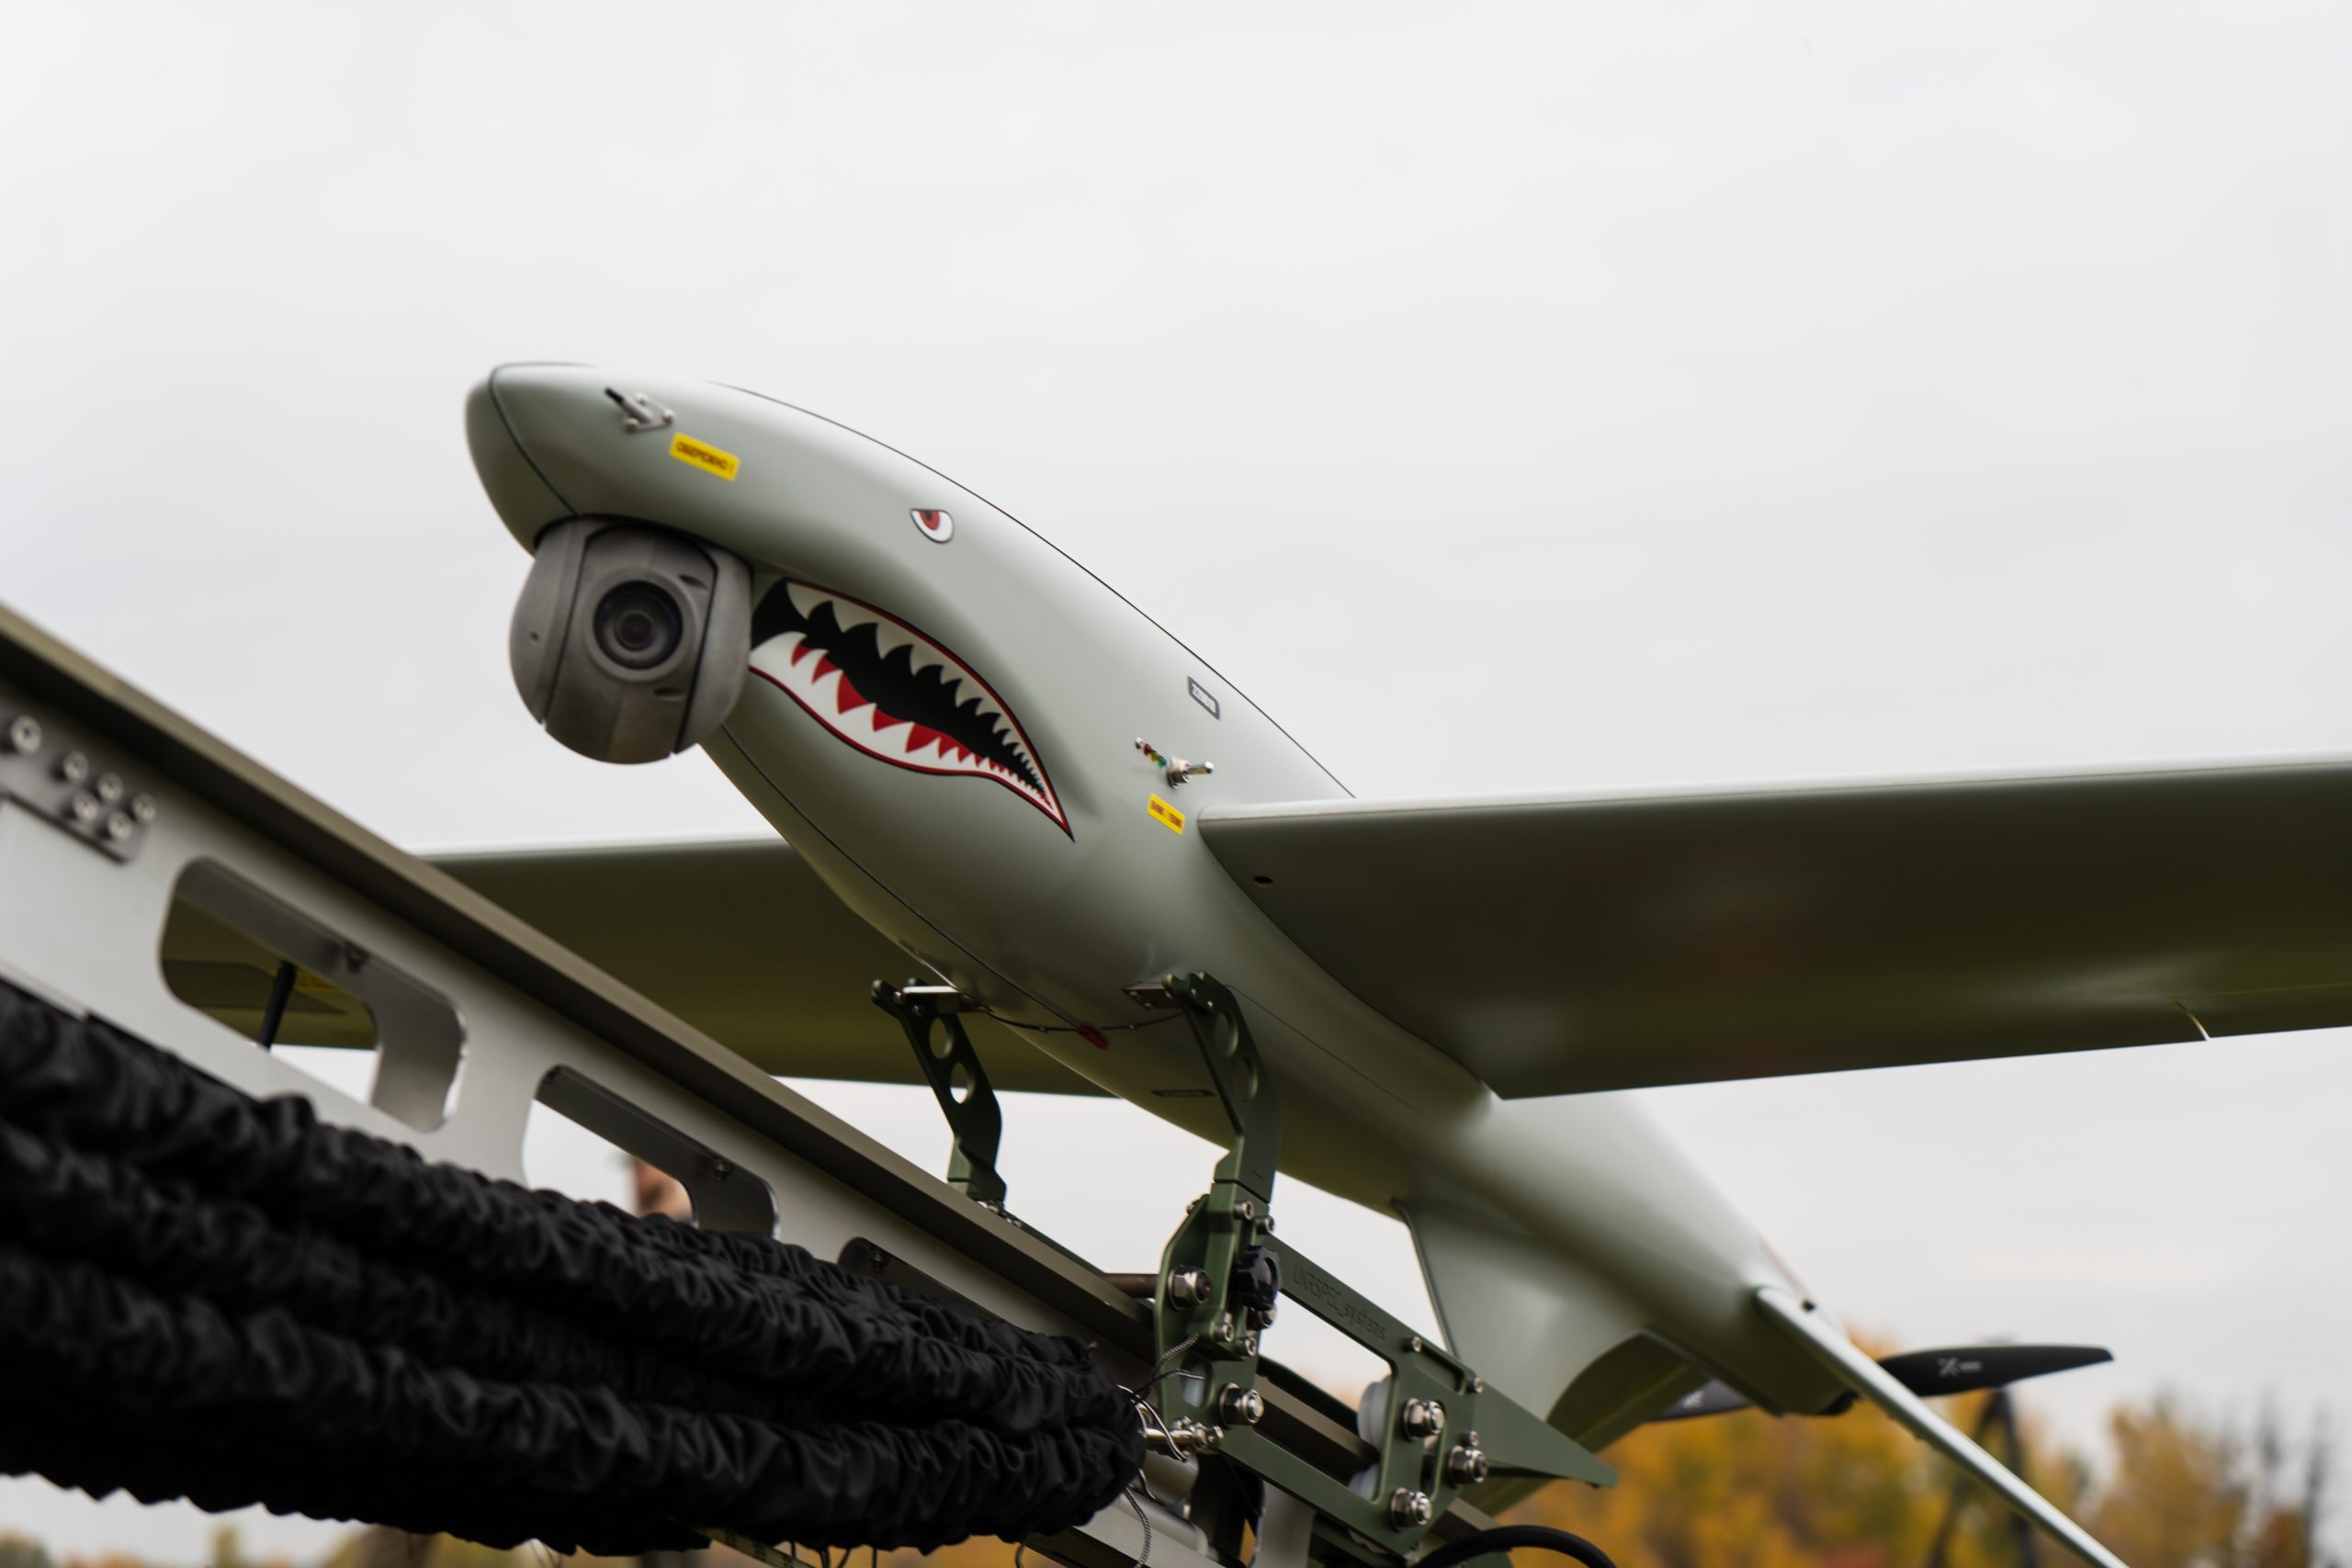 Come Back Alive charity foundation raises $8.8m to buy 25 Shark unmanned aerial reconnaissance drones